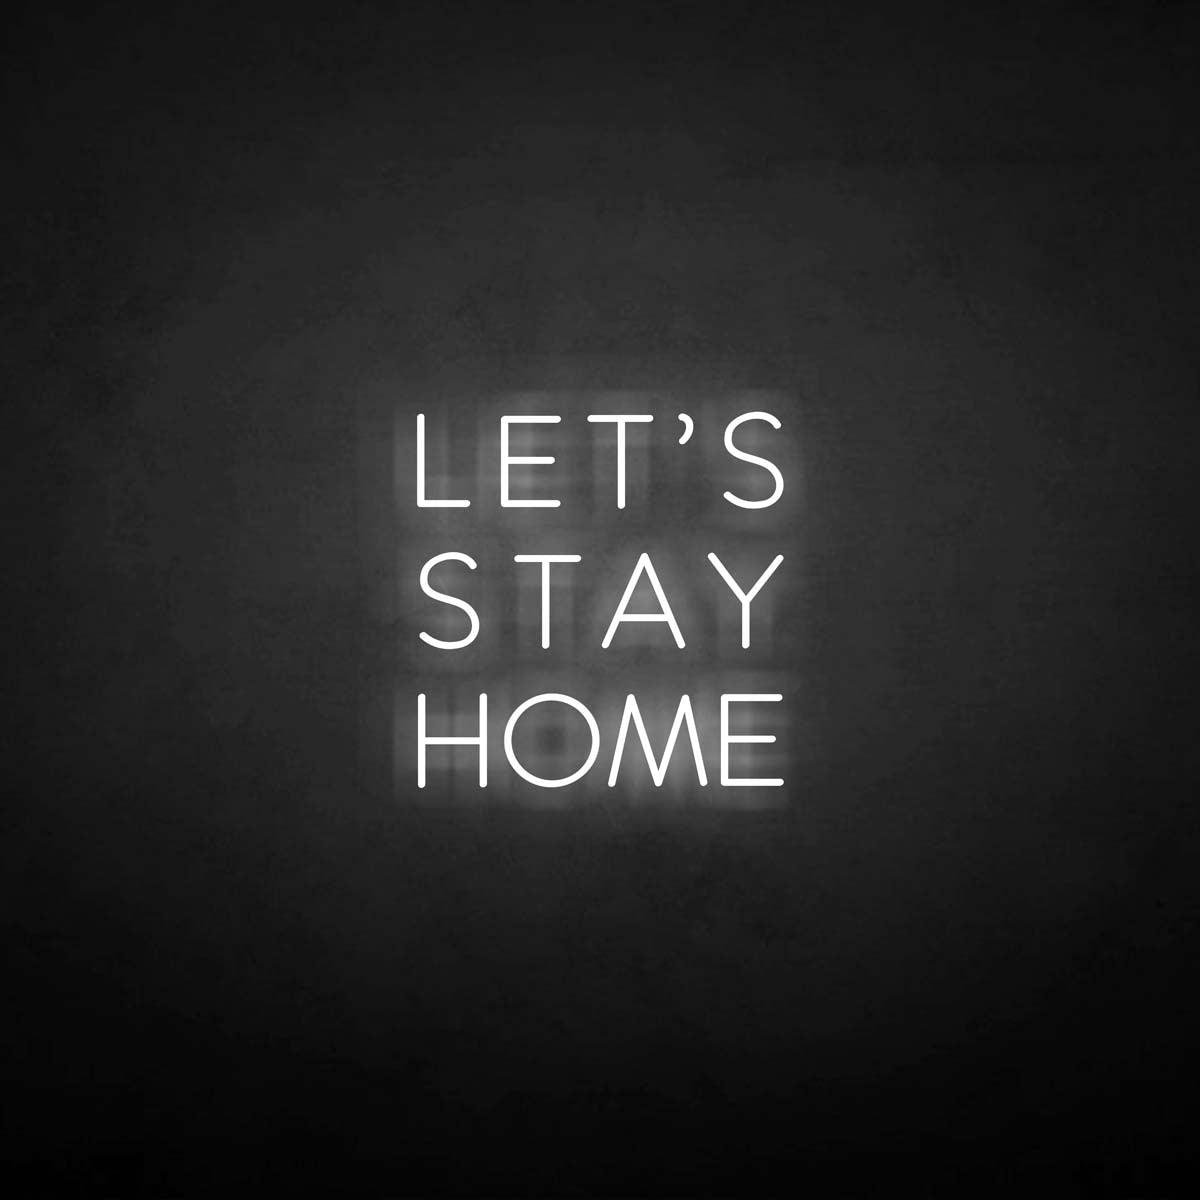 'LET'S STAY HOME' neon sign